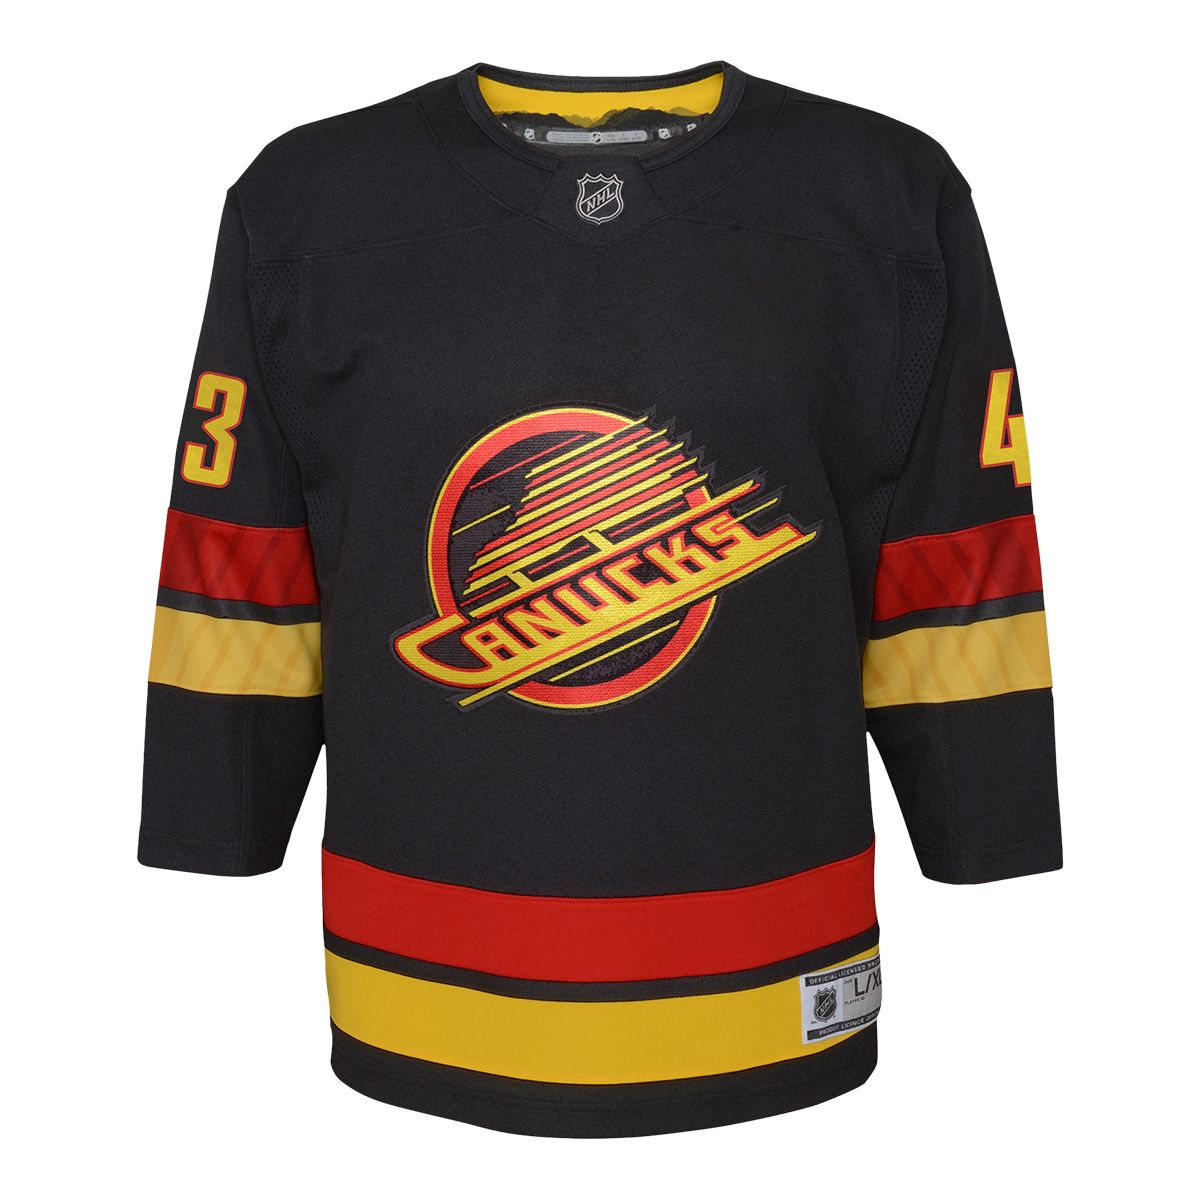 Out of all the special, limited edition jerseys that the Canucks